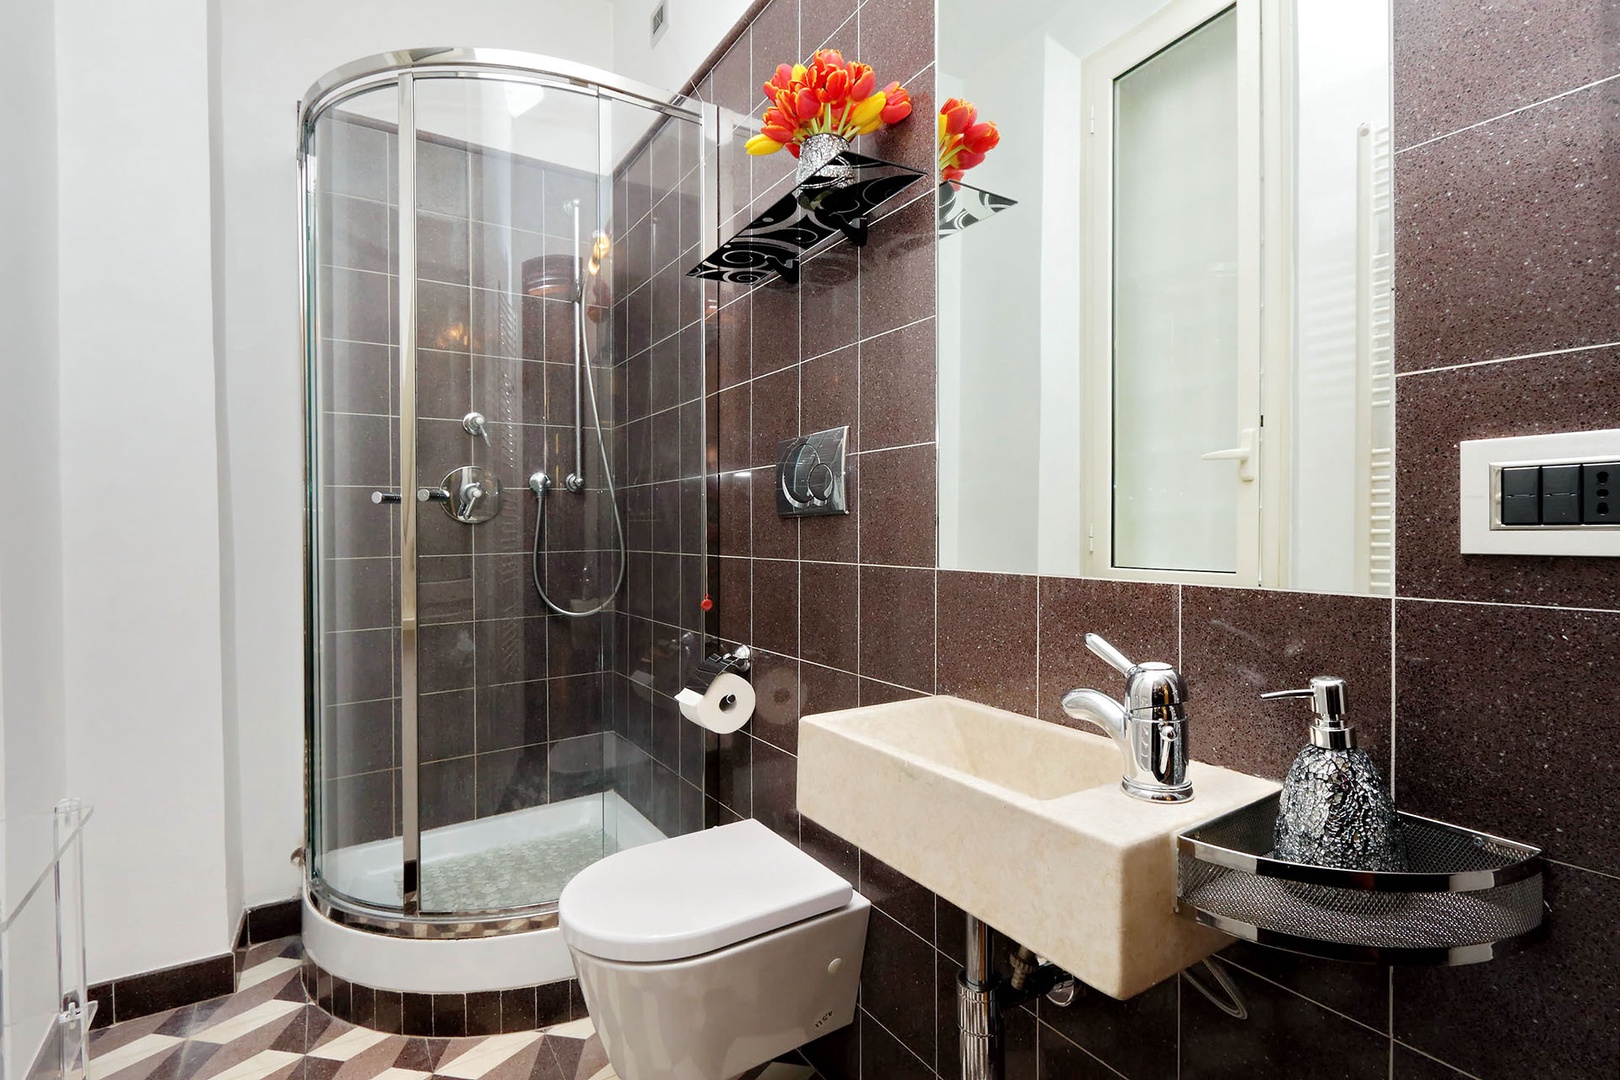 Modern bathroom 3, is located in the hallway right next to bedroom 4.